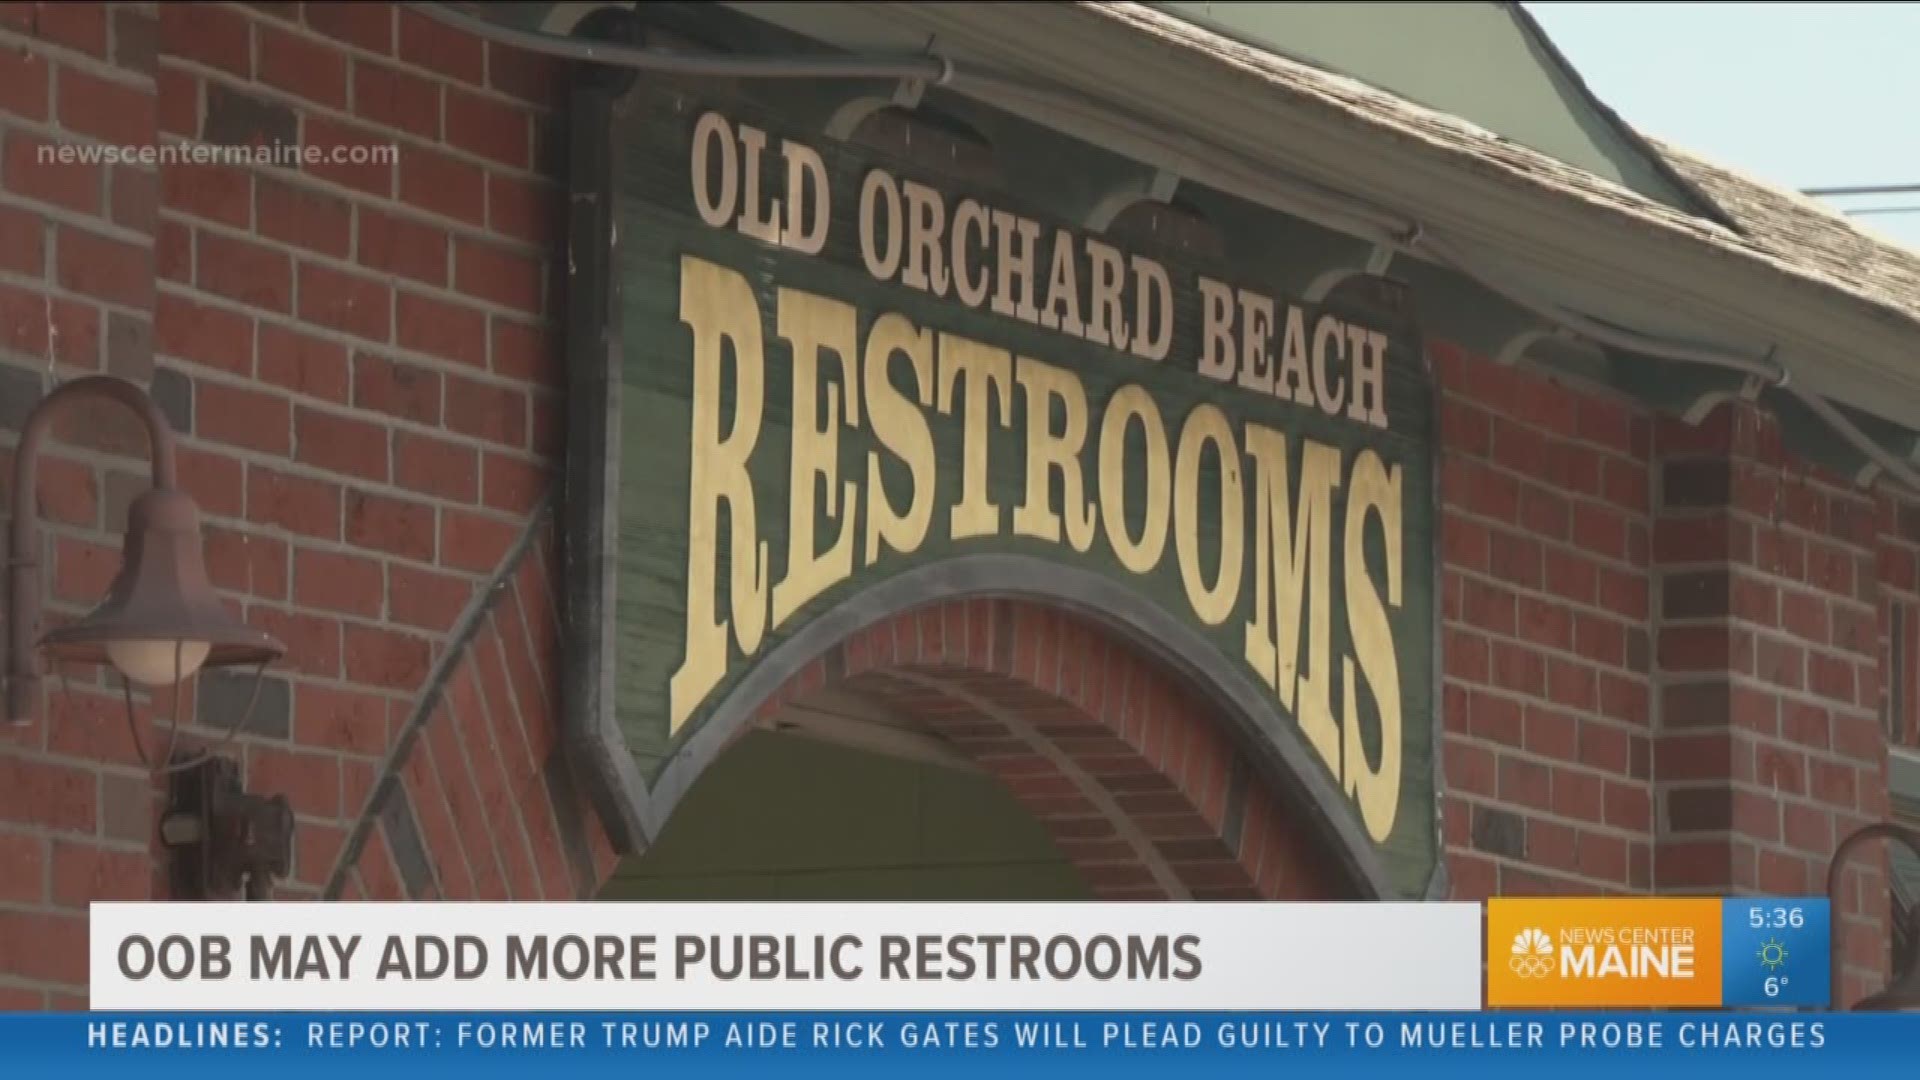 Old Orchard Beach considering adding new public restrooms